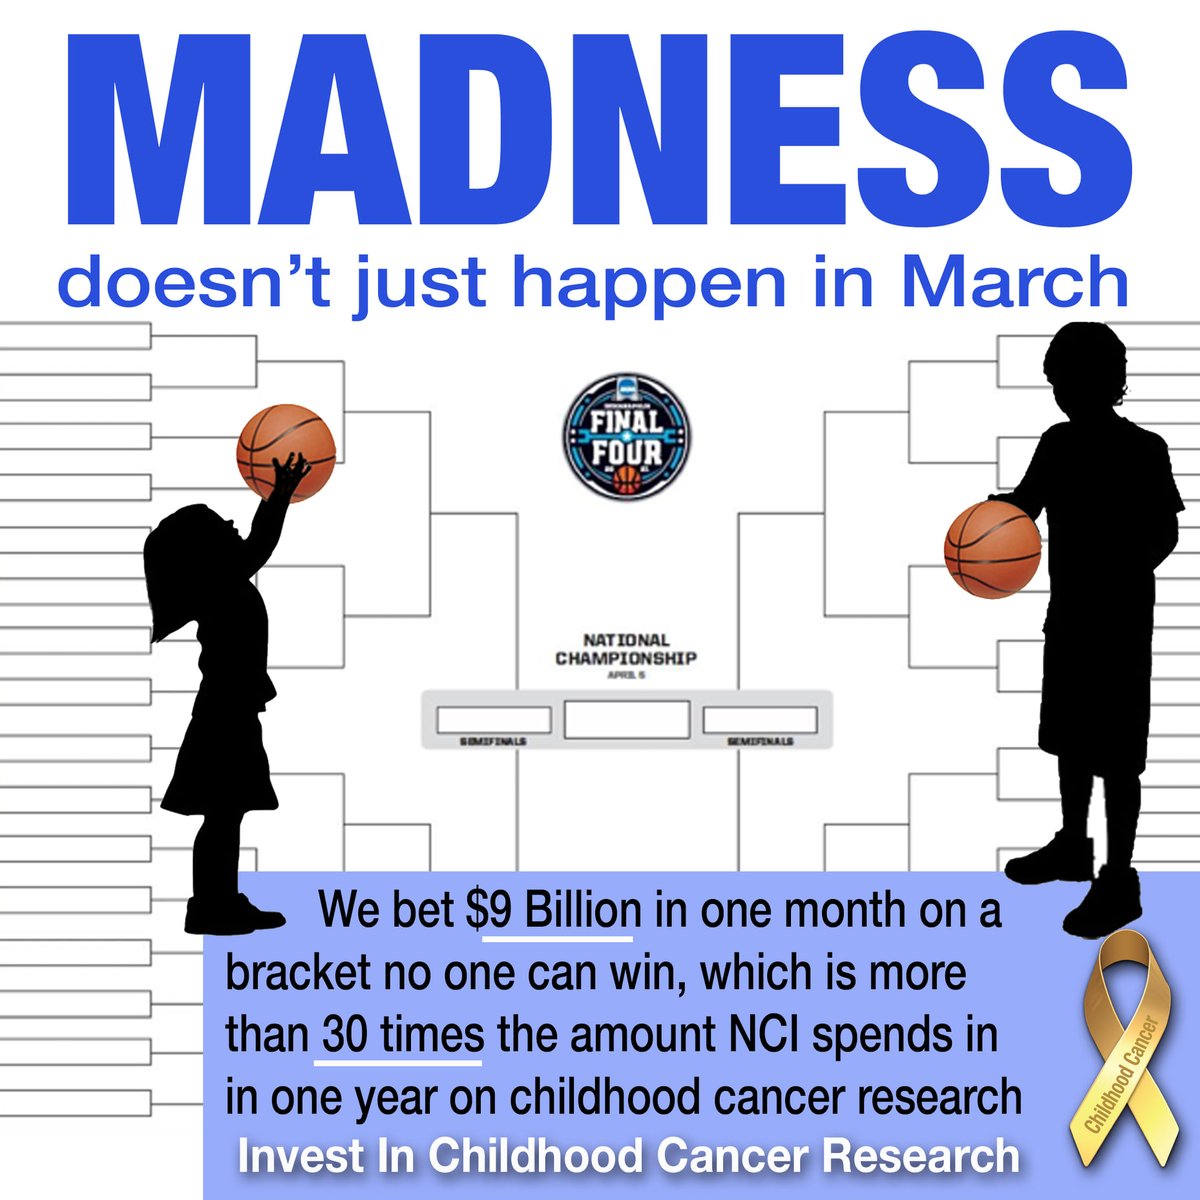 Isn't it madness for us to not invest in research on the #1 disease killer of our kids - #ChildhoodCancer. For every 5 children diagnosed, 4 survive. Sadly, most survivors are likely to have serious late effects due the treatment they received. @cac2org @HappyQuailPress #Final4